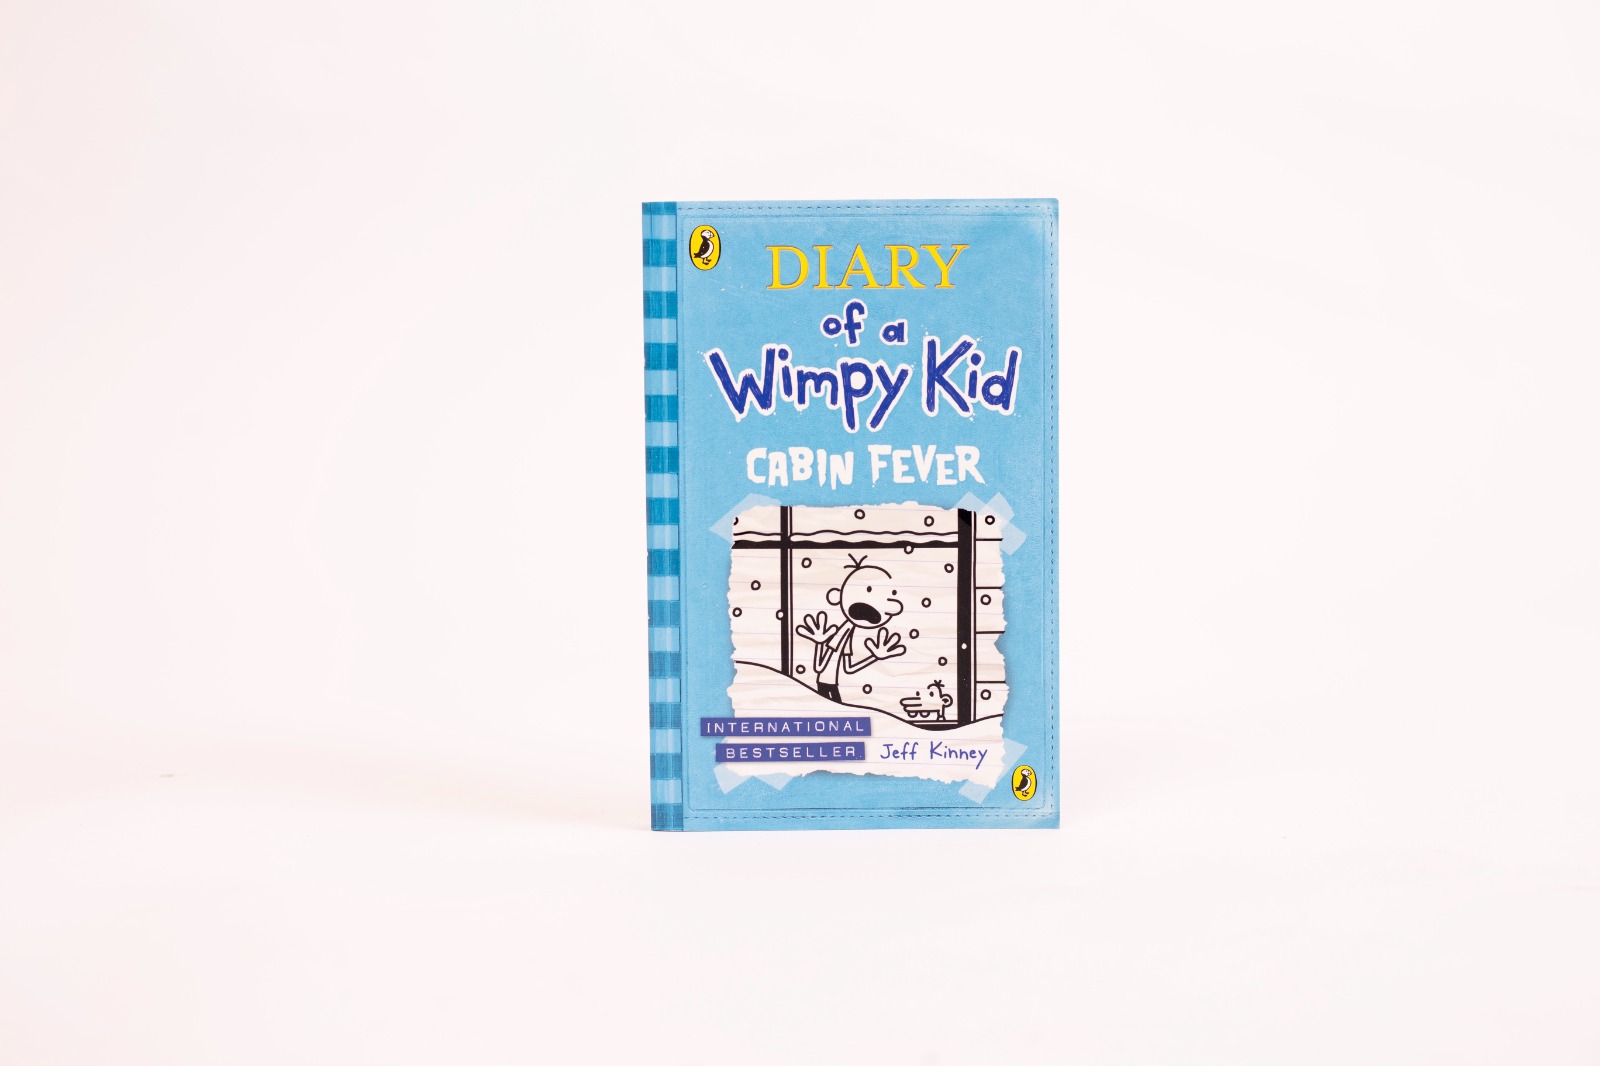 Diary of a Wimpy Kid books Greg Heffley series" "Best children's book series Funny kids' books Jeff Kinney books Middle-grade book series" "Popular children's book series Wimpy Kid movie adaptations